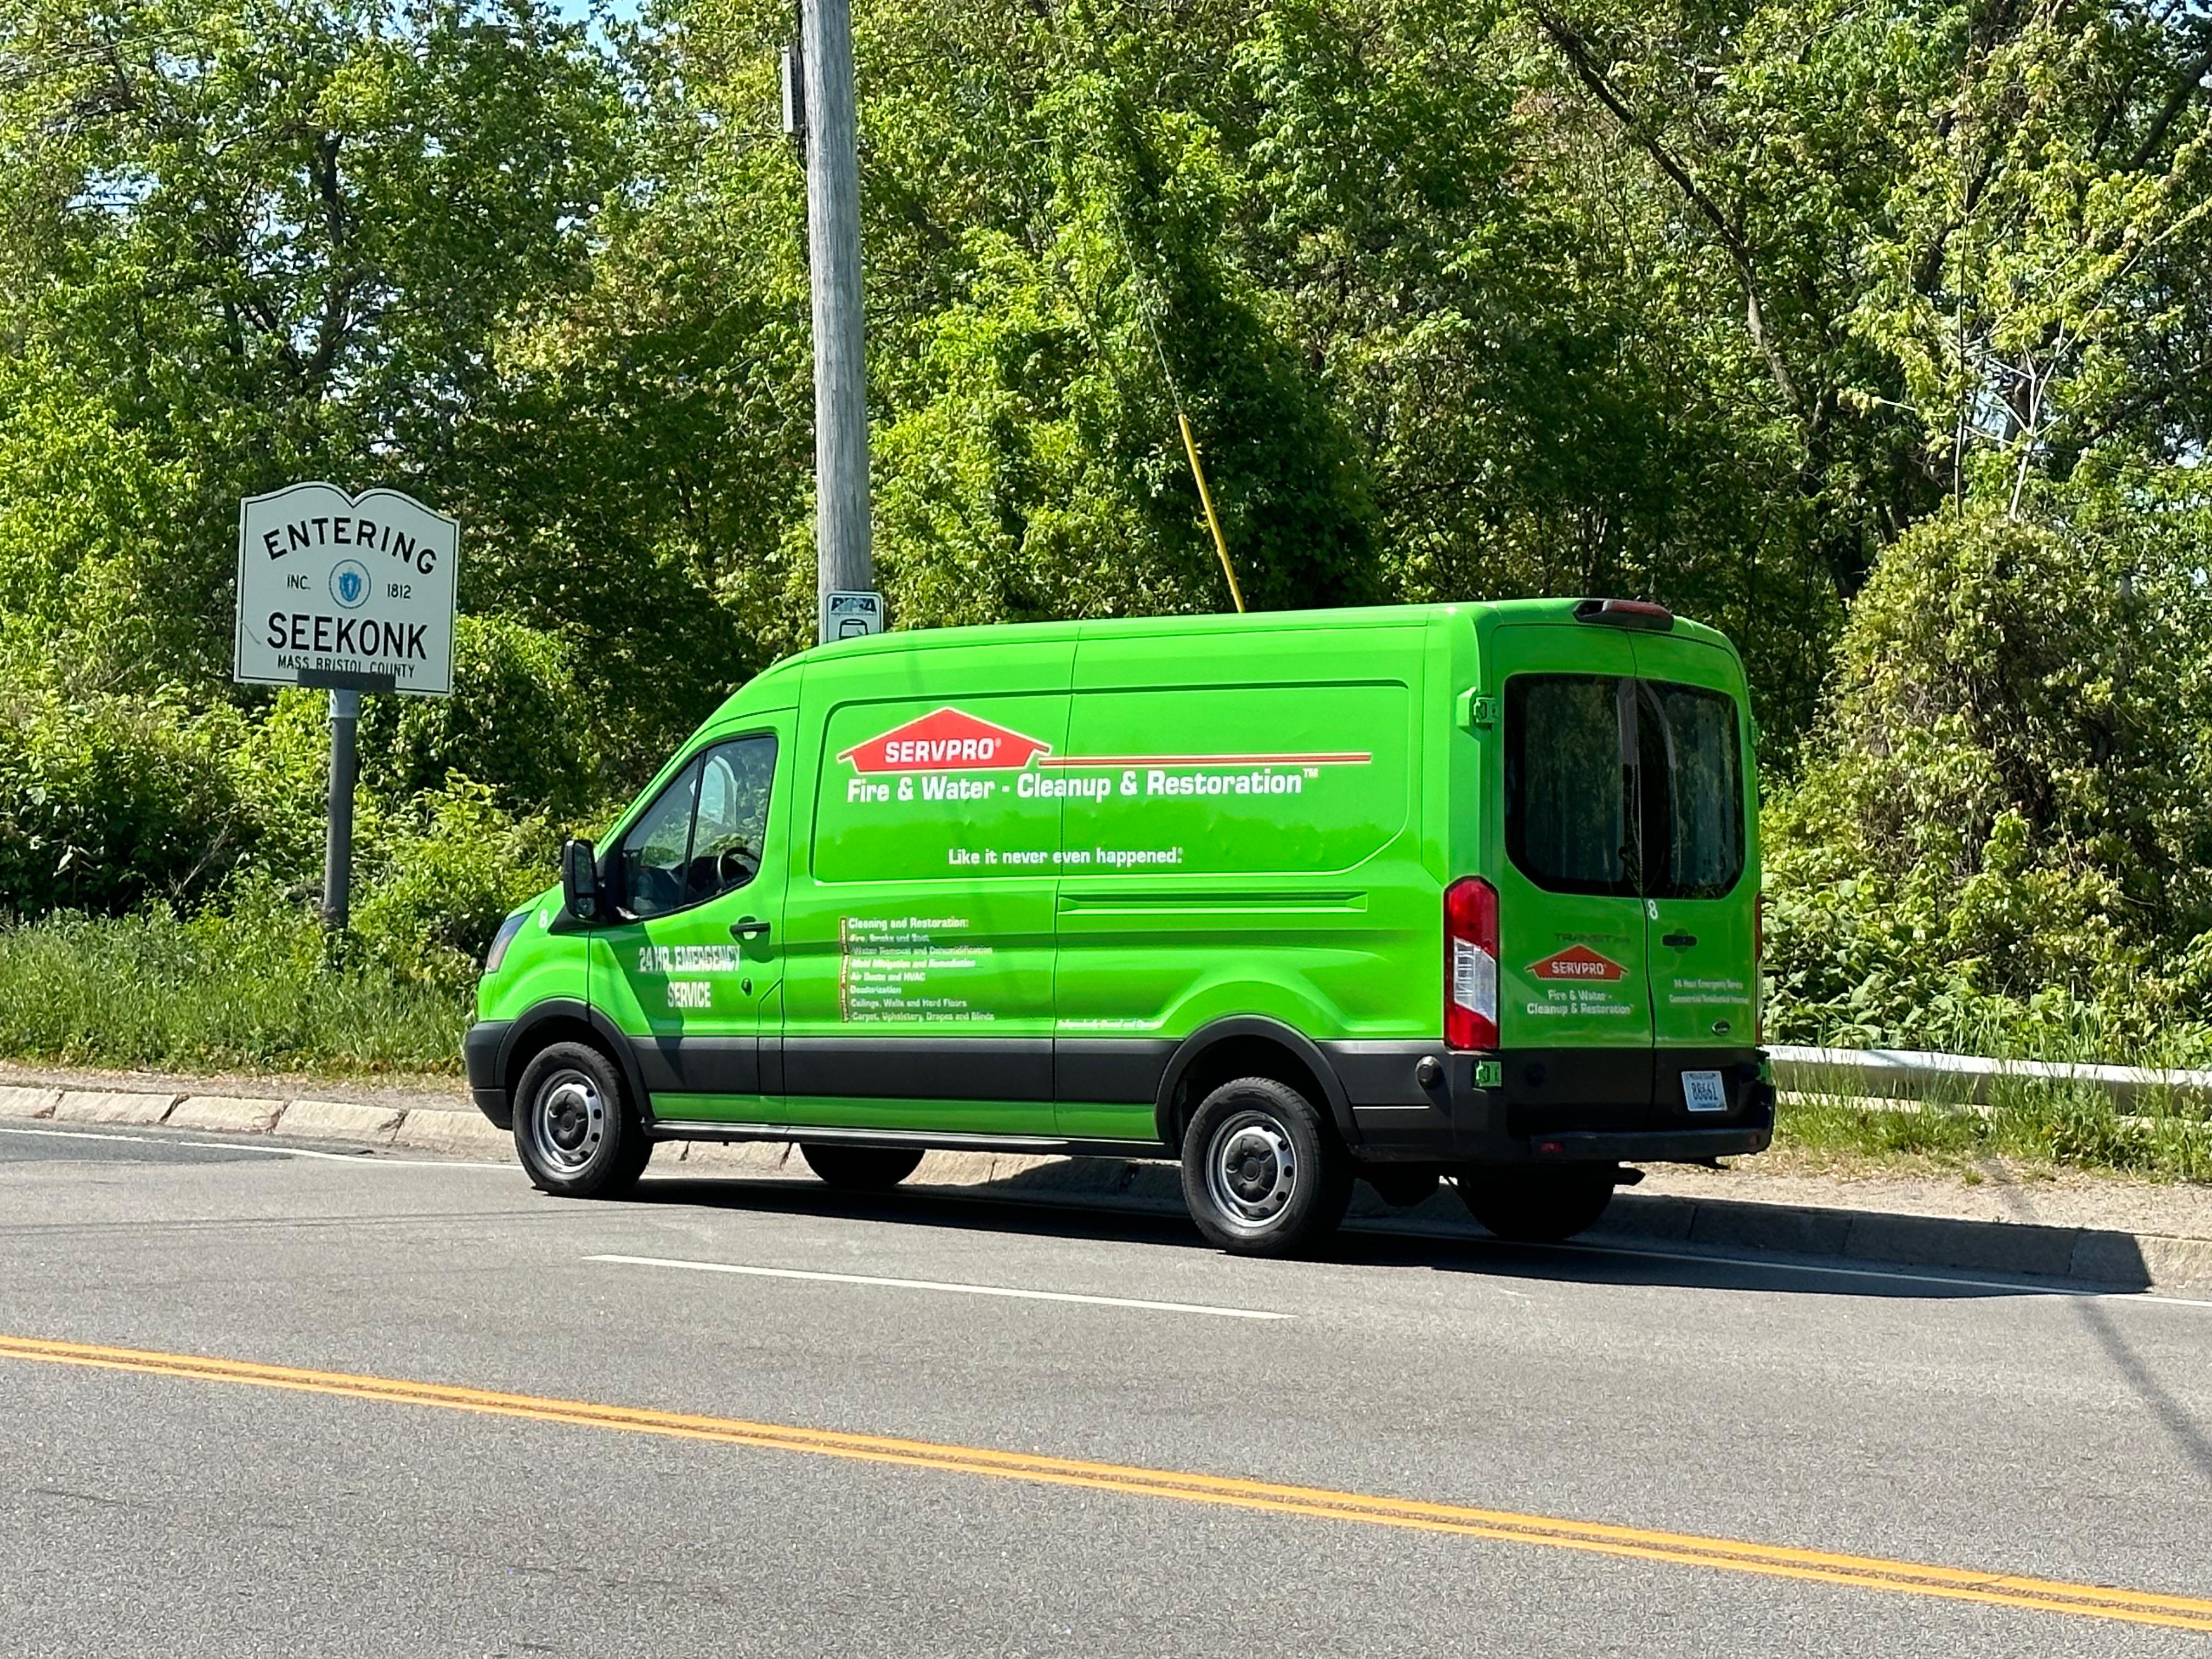 At SERVPRO of Taunton/Mansfield, we understand the stress and trauma of a disaster. That's why we offer complete restoration services for fire, mold, and water damage in Seekonk, MA. Give us a call to schedule services!